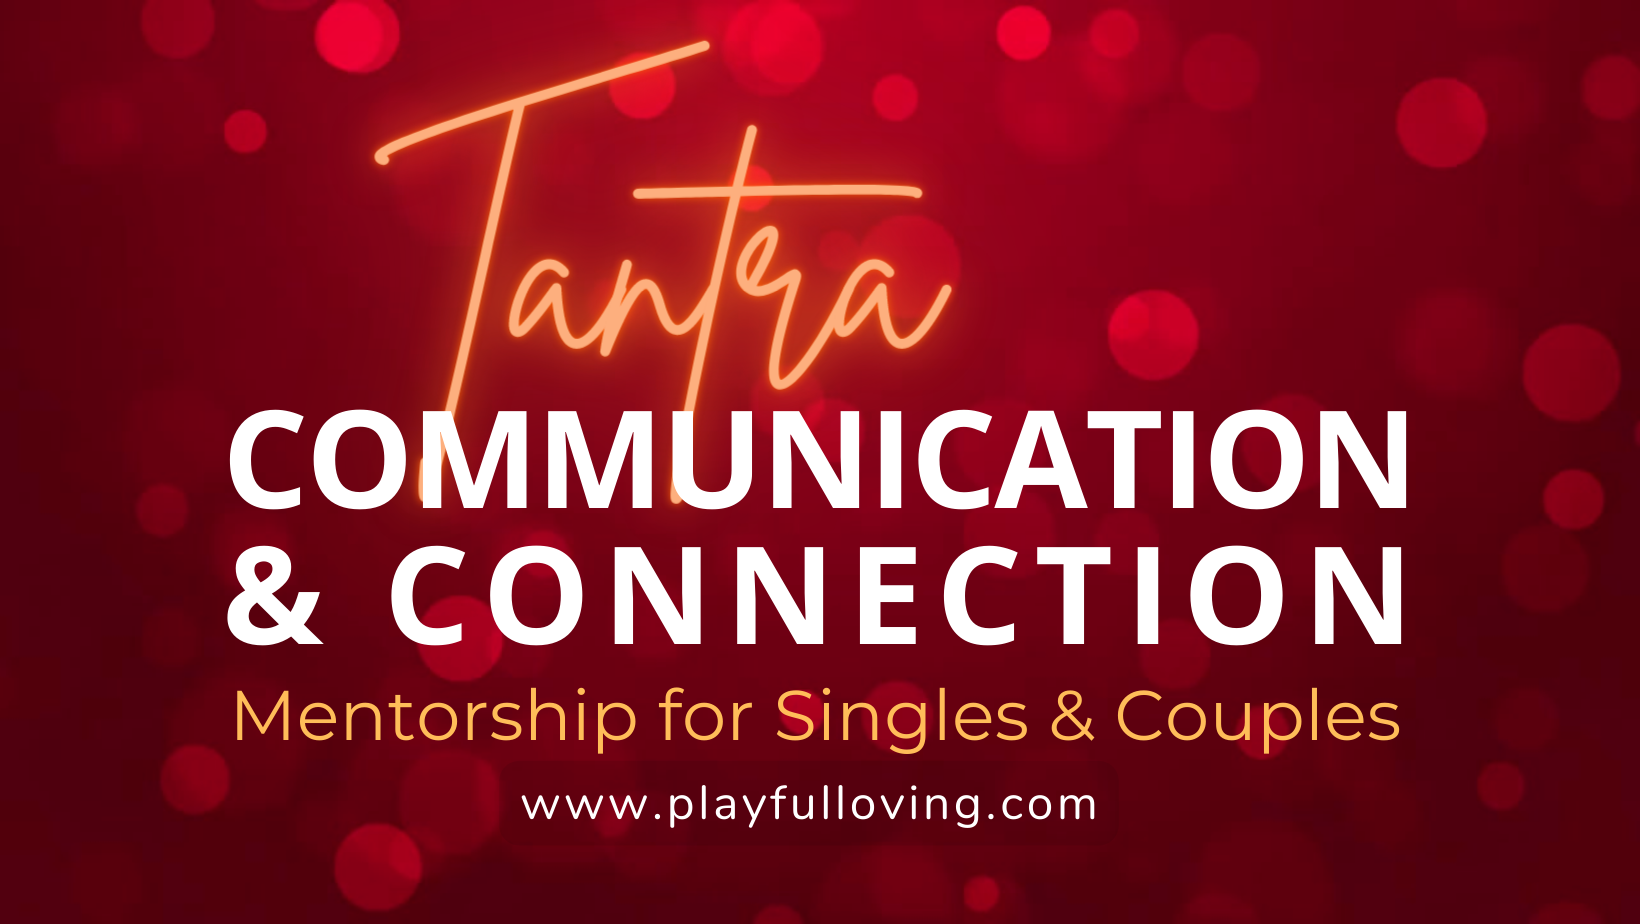 Tantra for Women - Group Program In-person or Online - Playful Loving with Viktoria